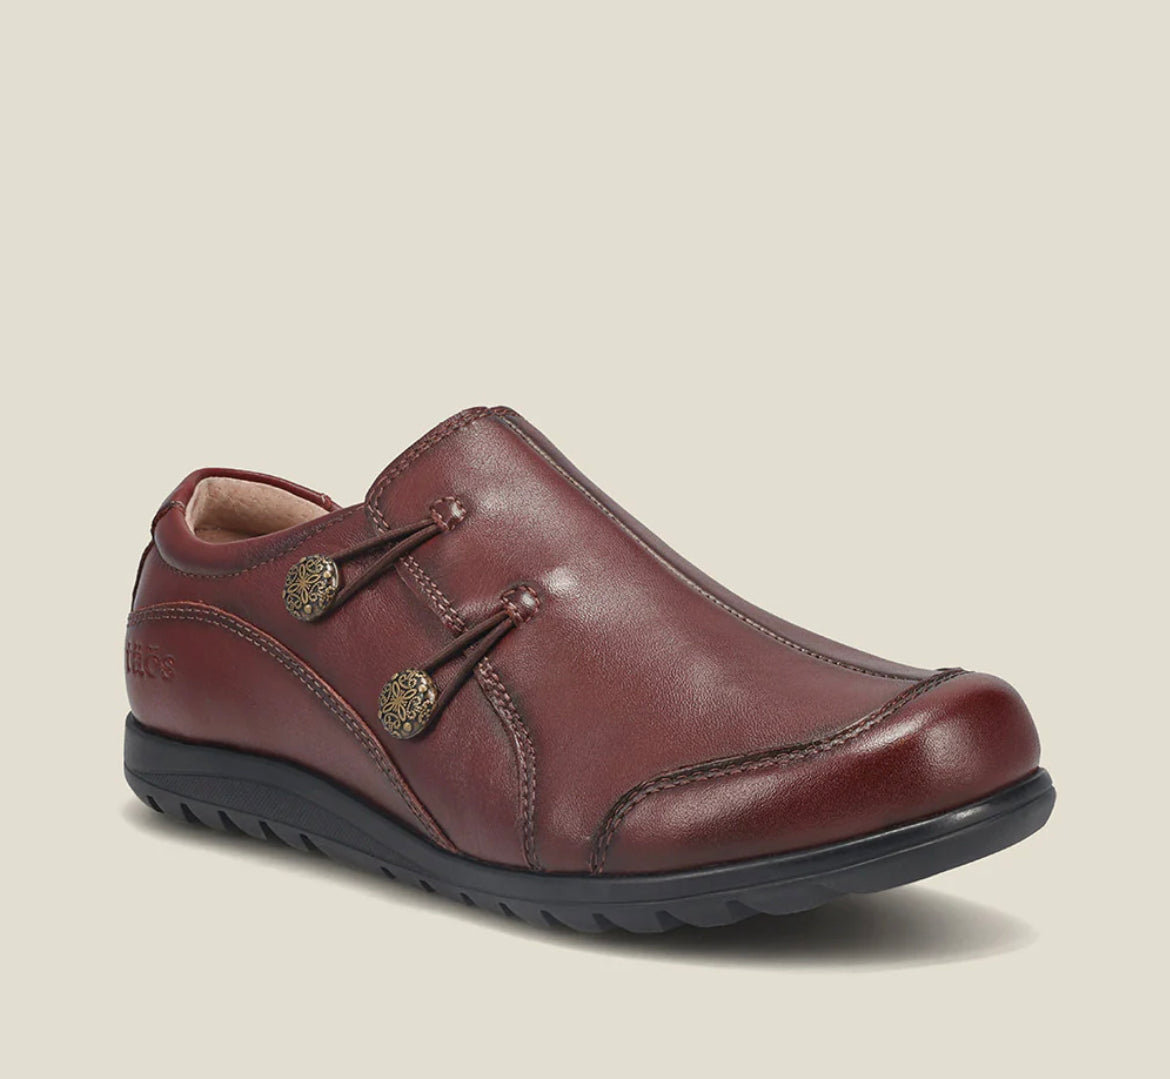 Taos Blend Whiskey Women’s Shoe - All Mixed Up 